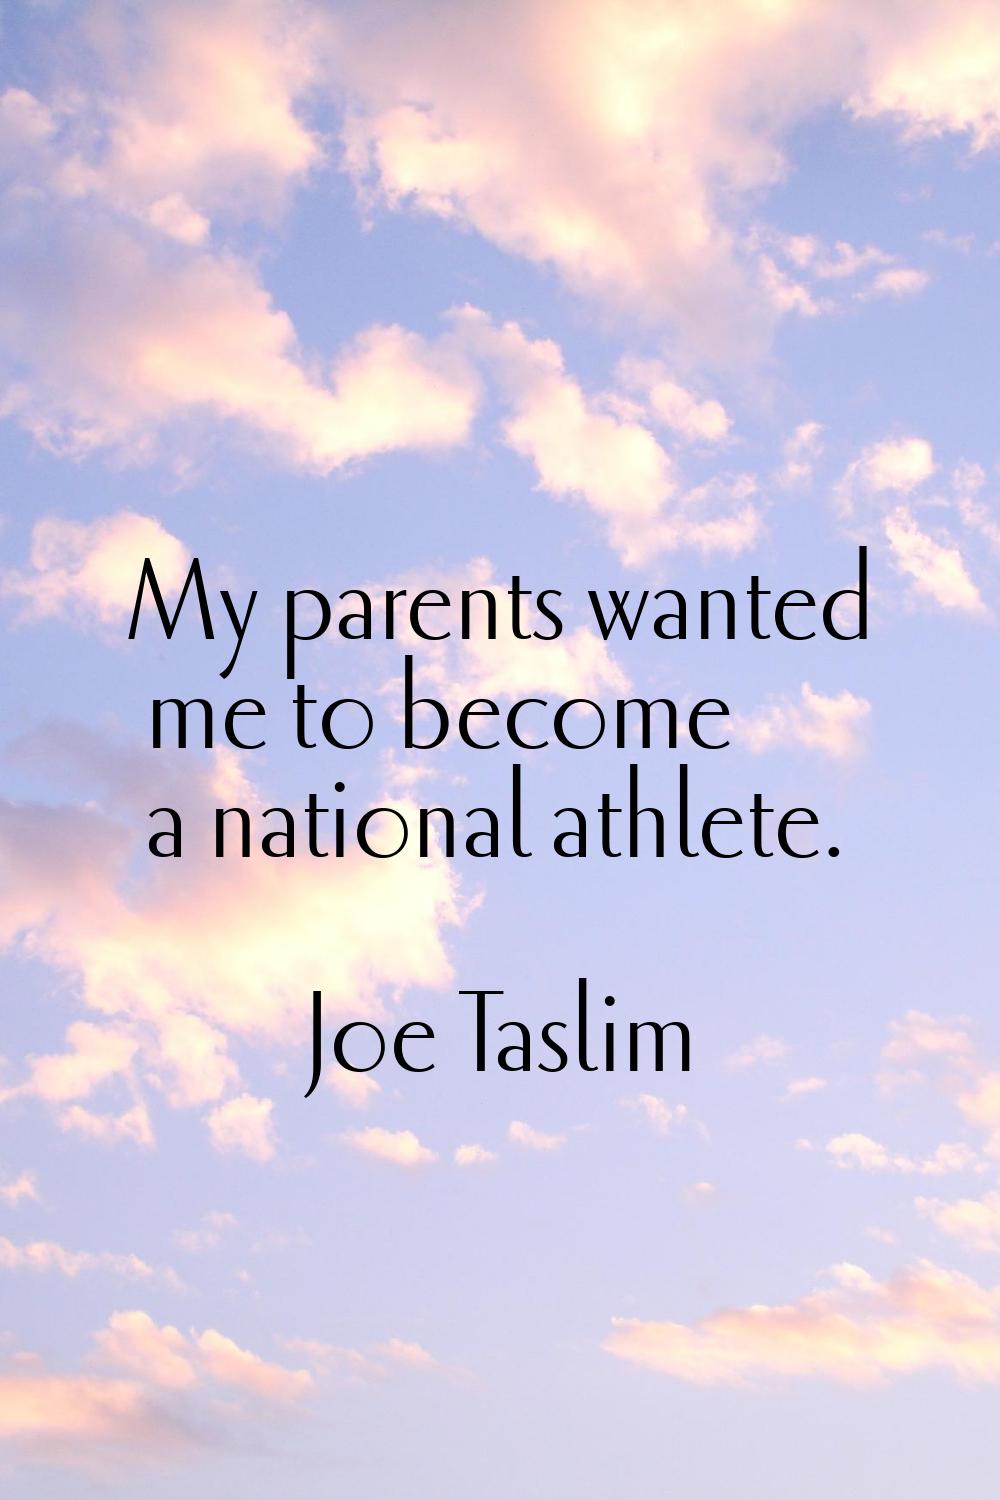 My parents wanted me to become a national athlete.